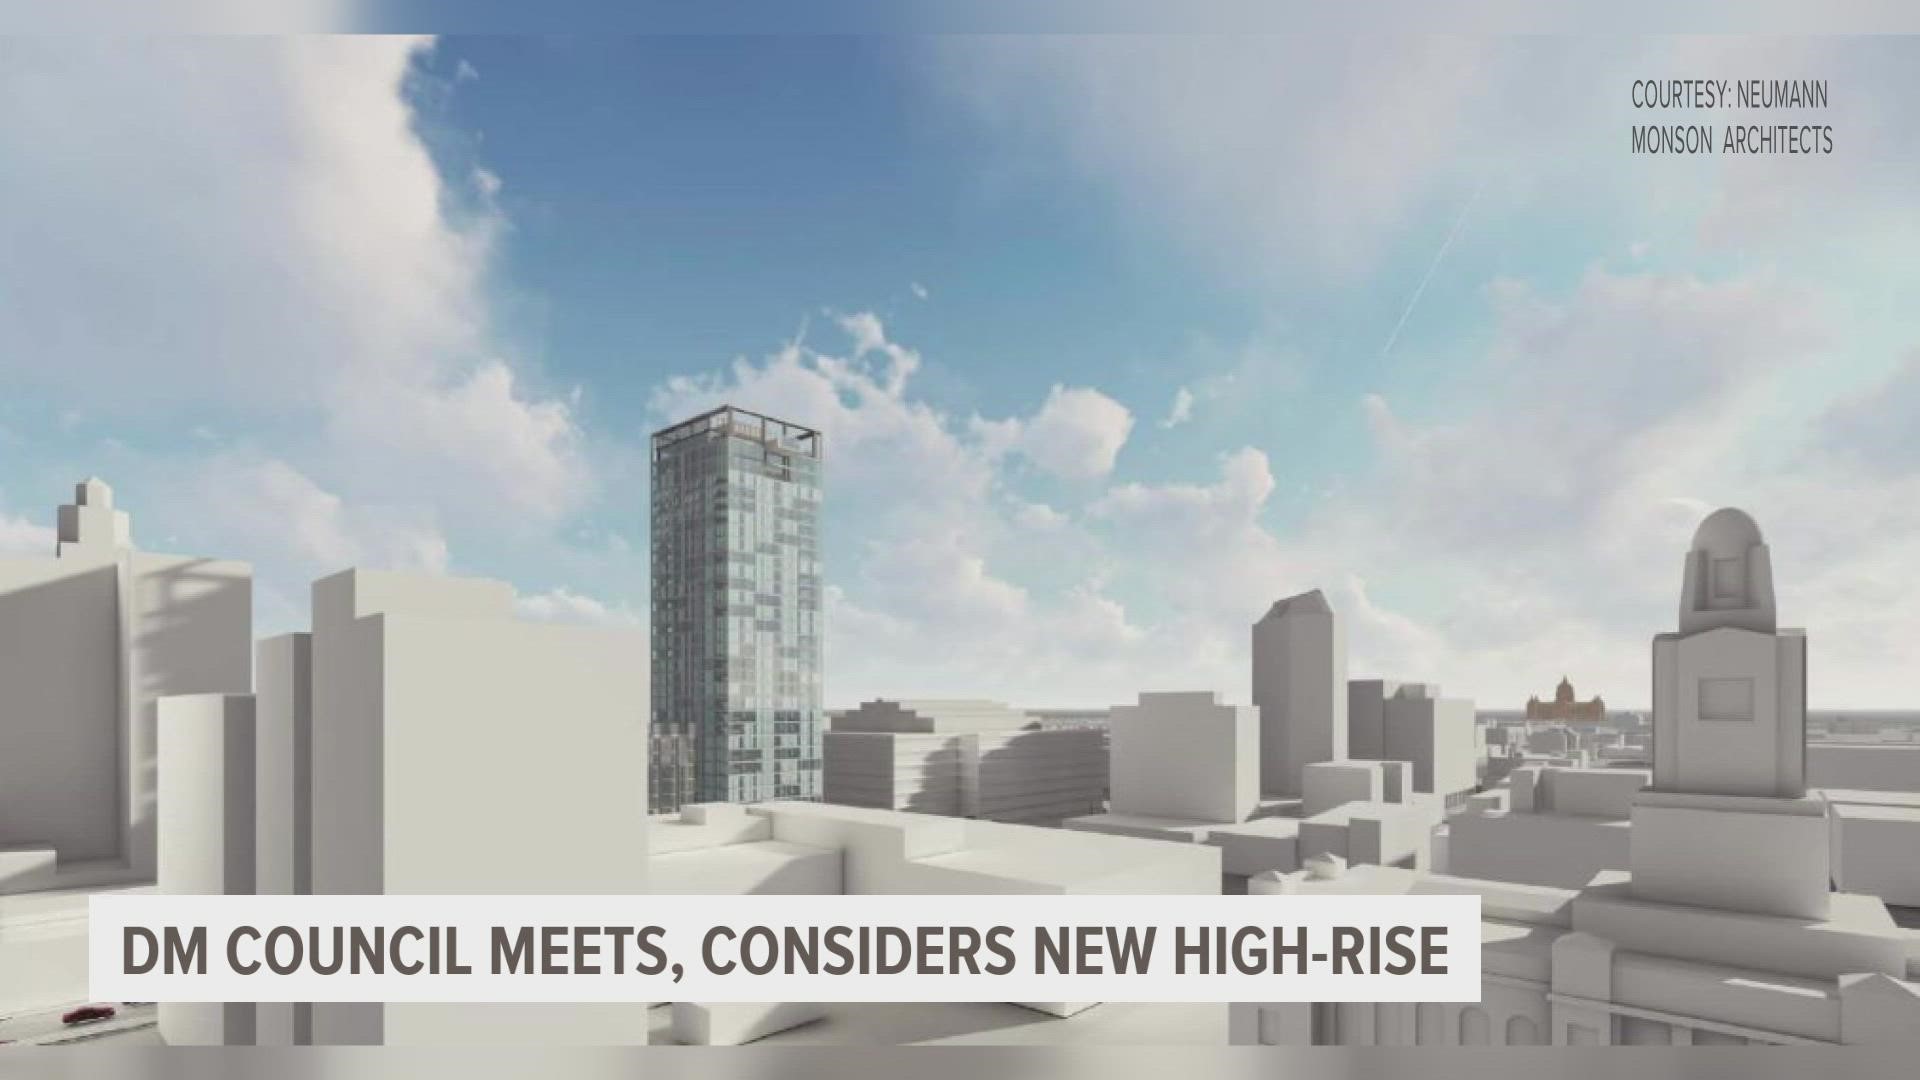 The resolution would allow the city to move forward with negotiations surrounding the construction of a a 33-story, multi-family apartment tower at 515 Walnut St.